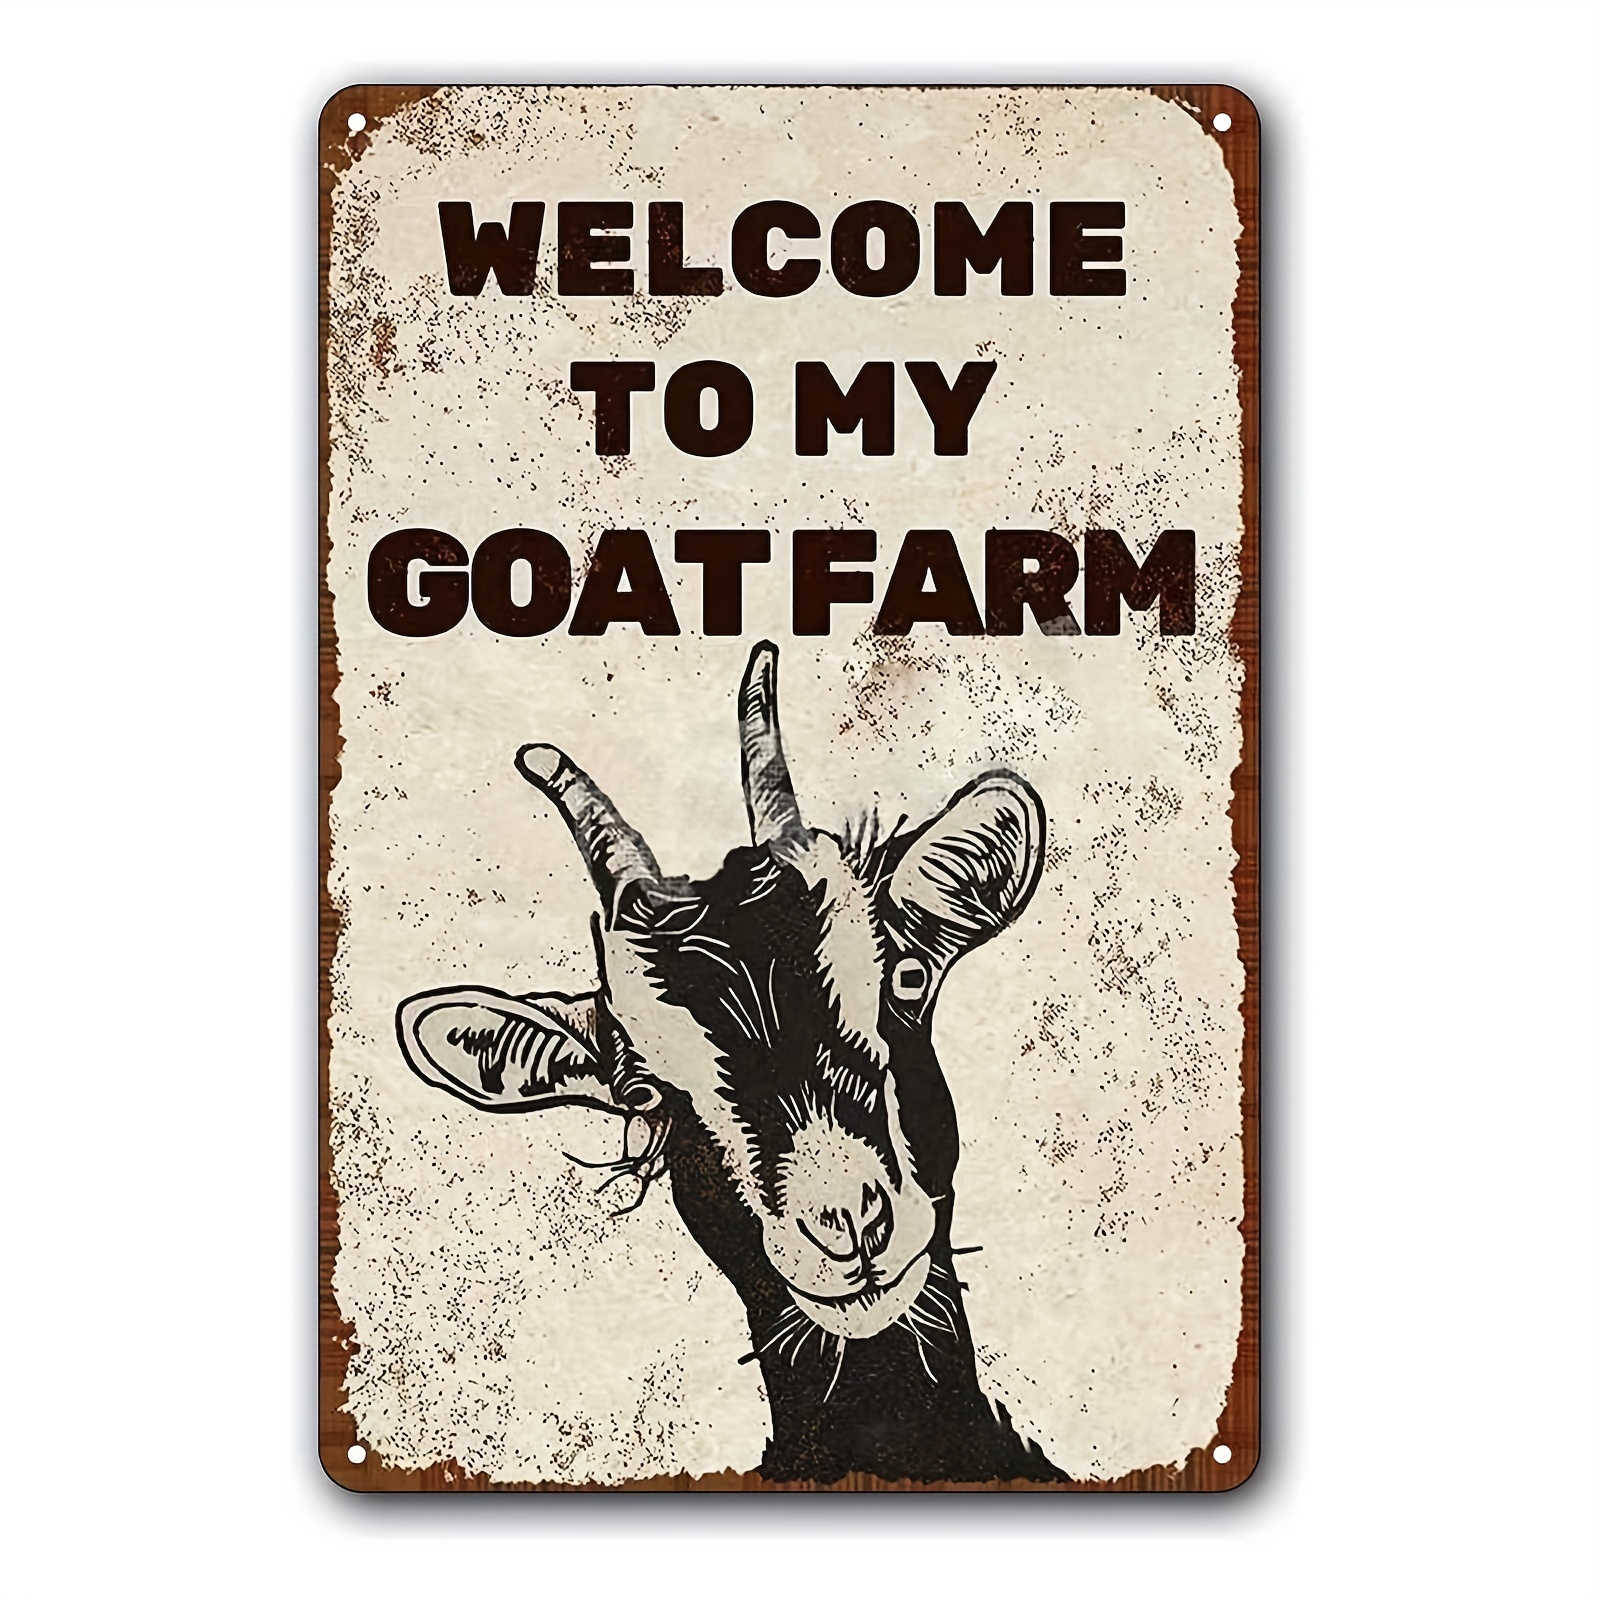 Beware Of Goat Sign Decor Aluminum Goat Gifts For Goat Lovers - Goats  Supplies Shelter Stuffed Toy Stuff Vintage Wall Decor For Home Club Bar  Cafes Store Restaurant 8 x 12 Inches 